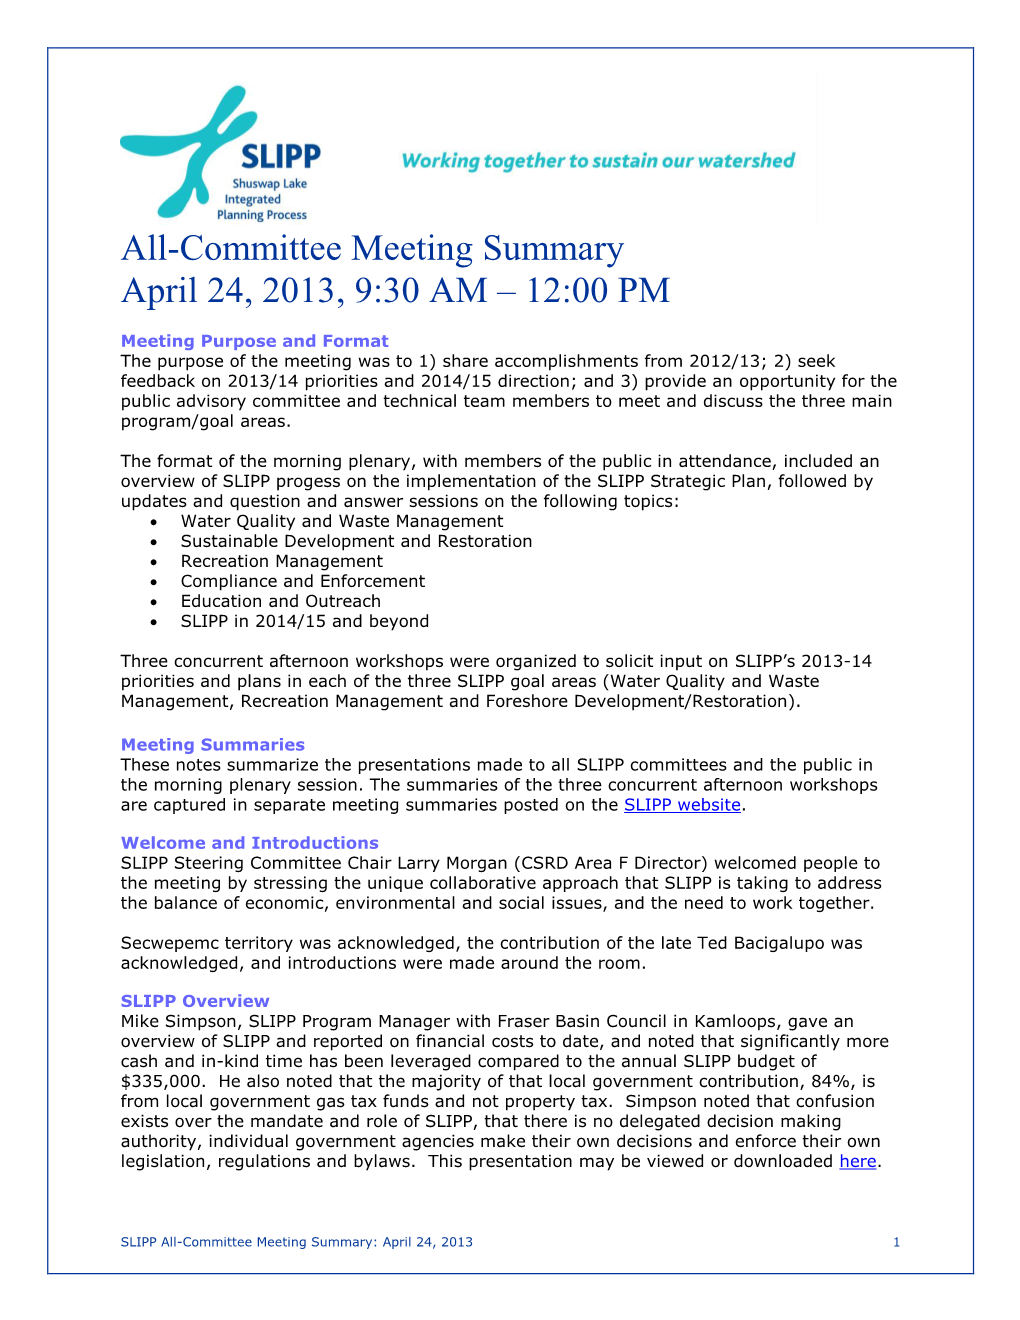 All-Committee Meeting Summary April 24, 2013, 9:30 AM – 12:00 PM